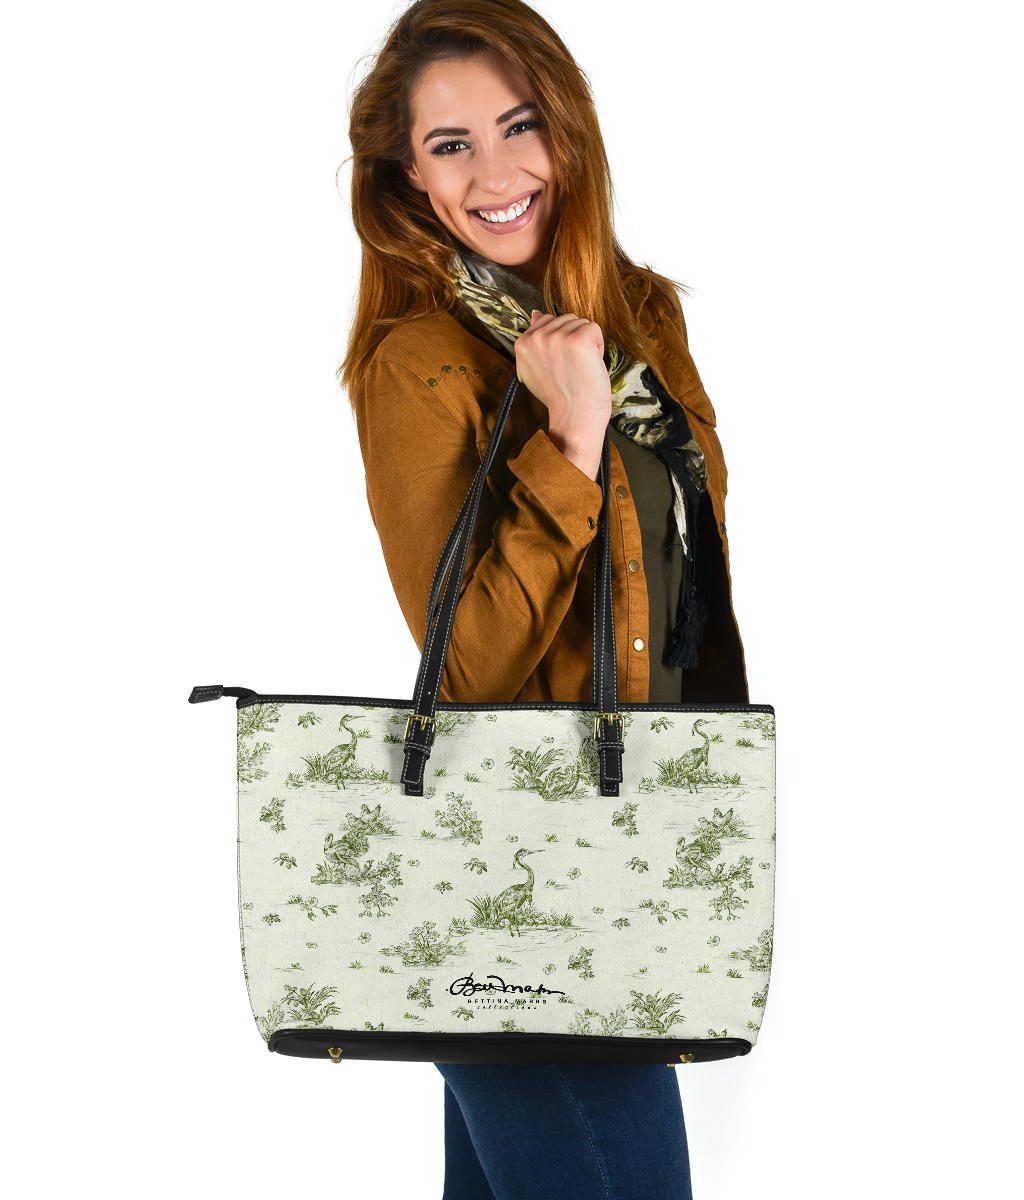 Toiles de Jouy tree Hugging Forest Green Large Tote Bag